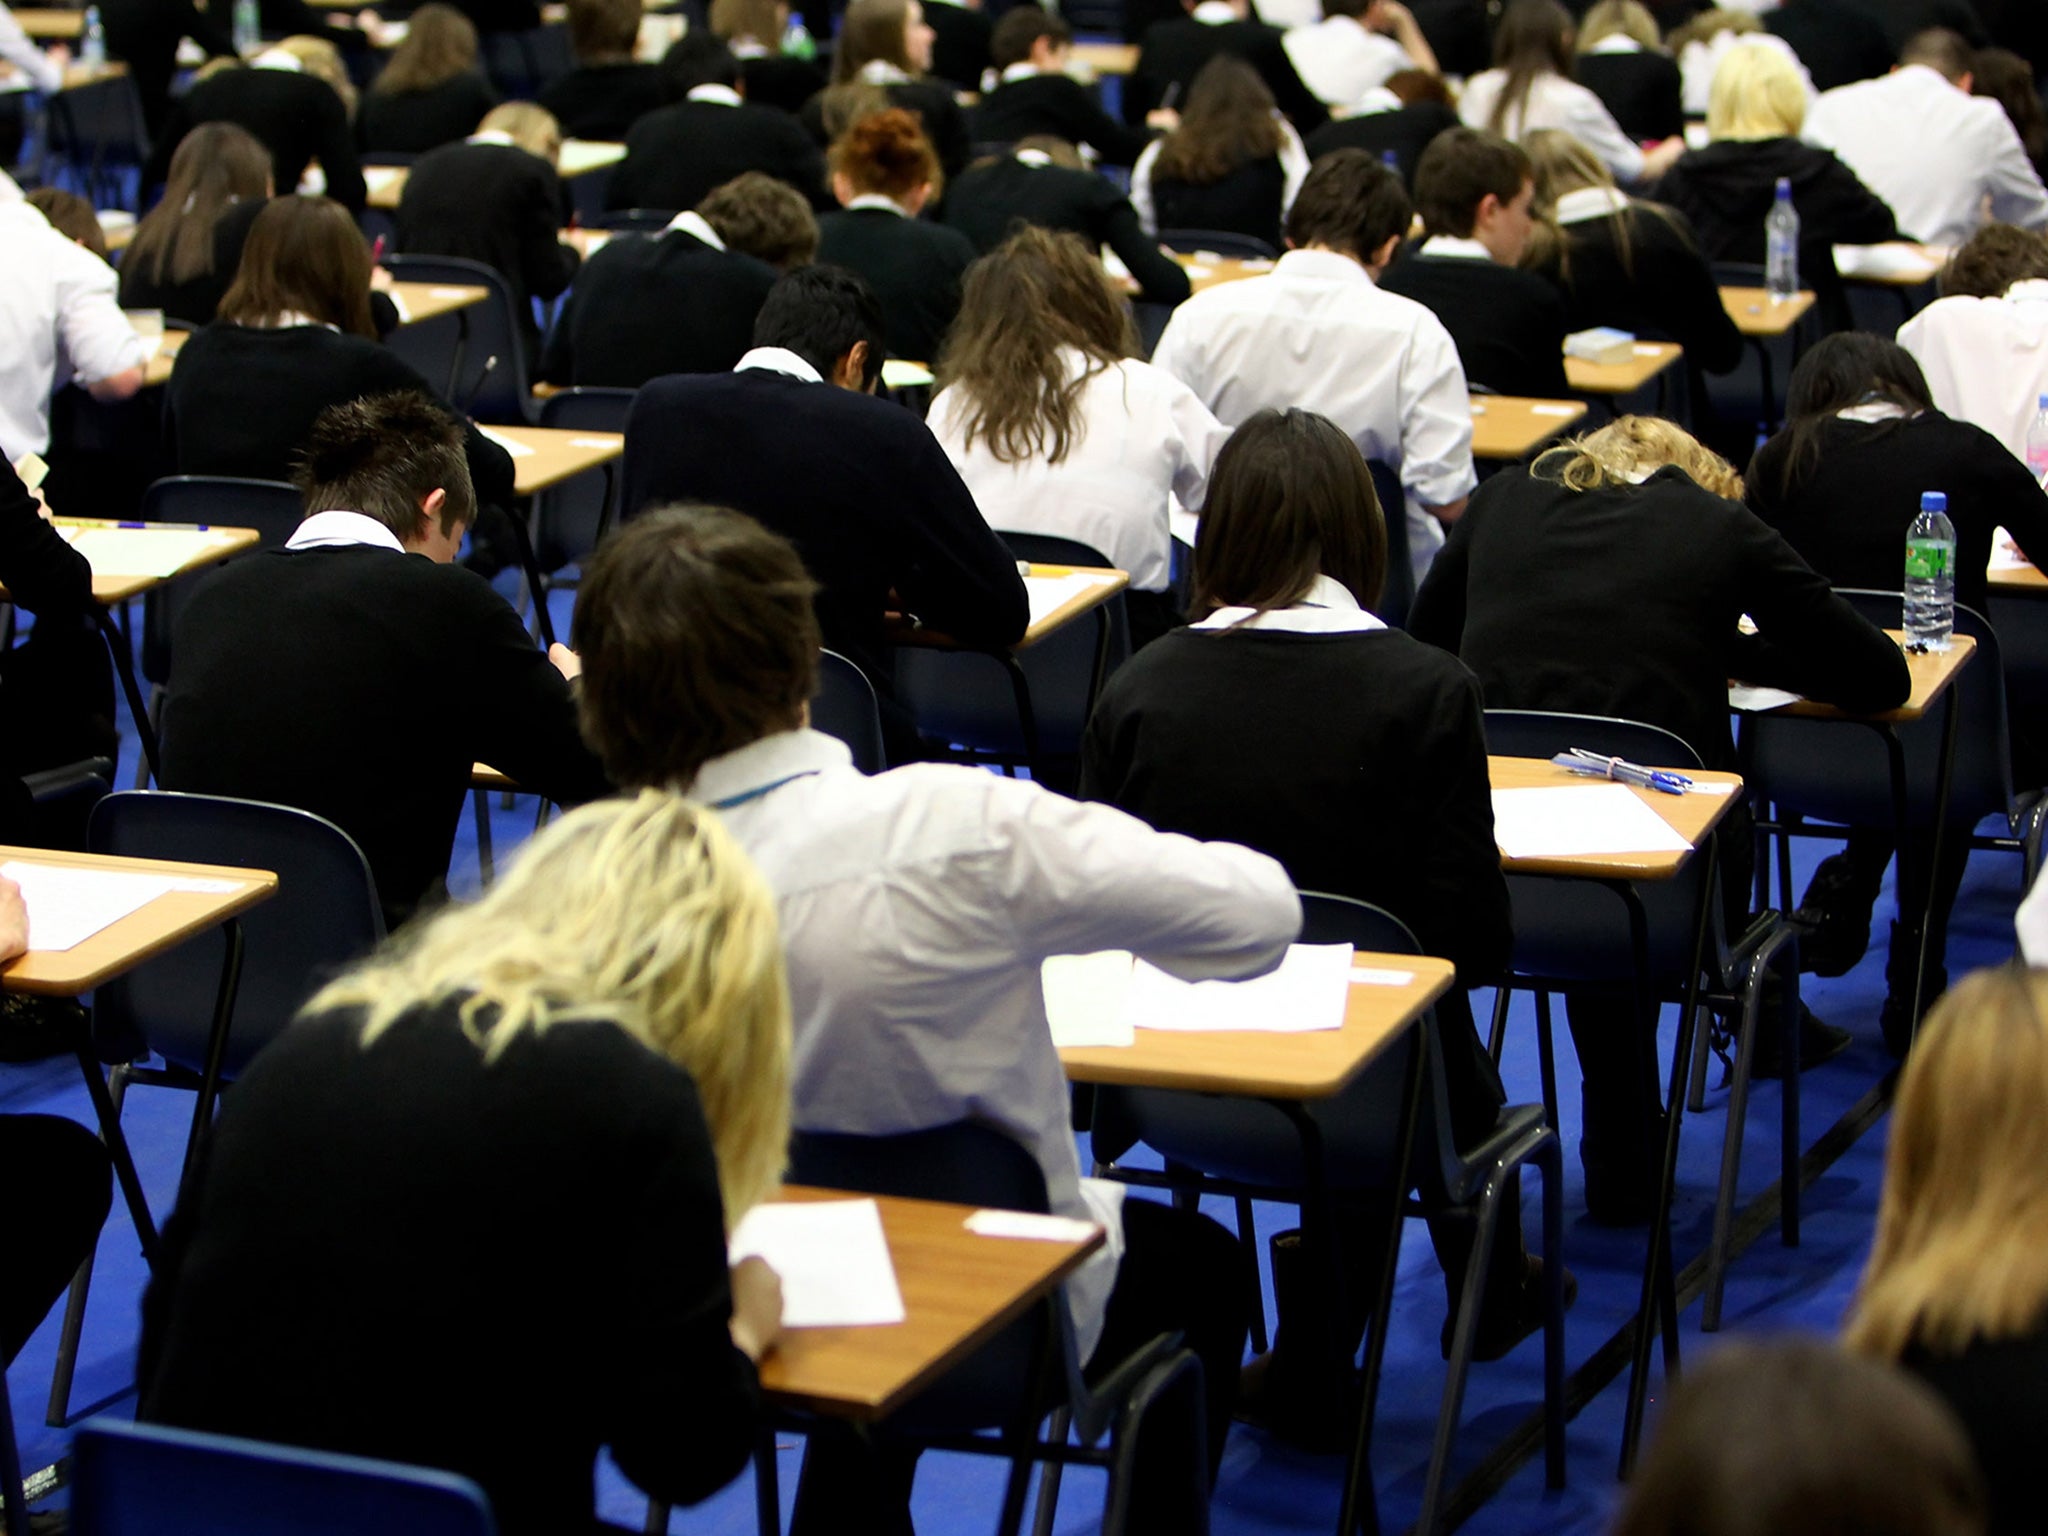 Exam result figures will show teenagers are shying away from subjects no longer rated by university admissions staff